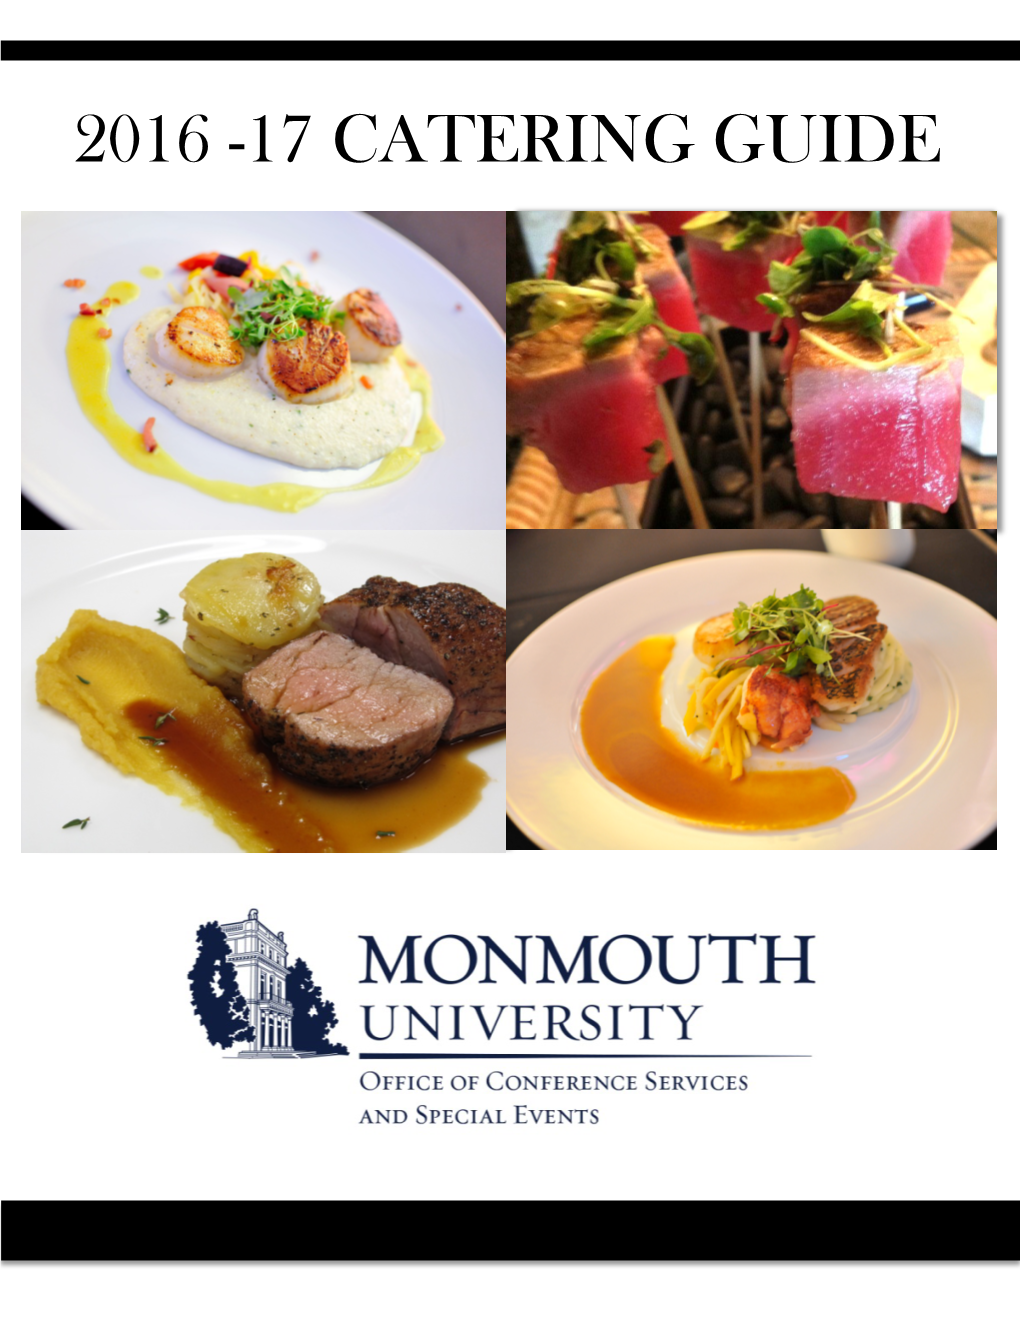 2016 -17 CATERING GUIDE Monmouth University Is Proud to Partner with a New Dining Provider GOURMET DINING